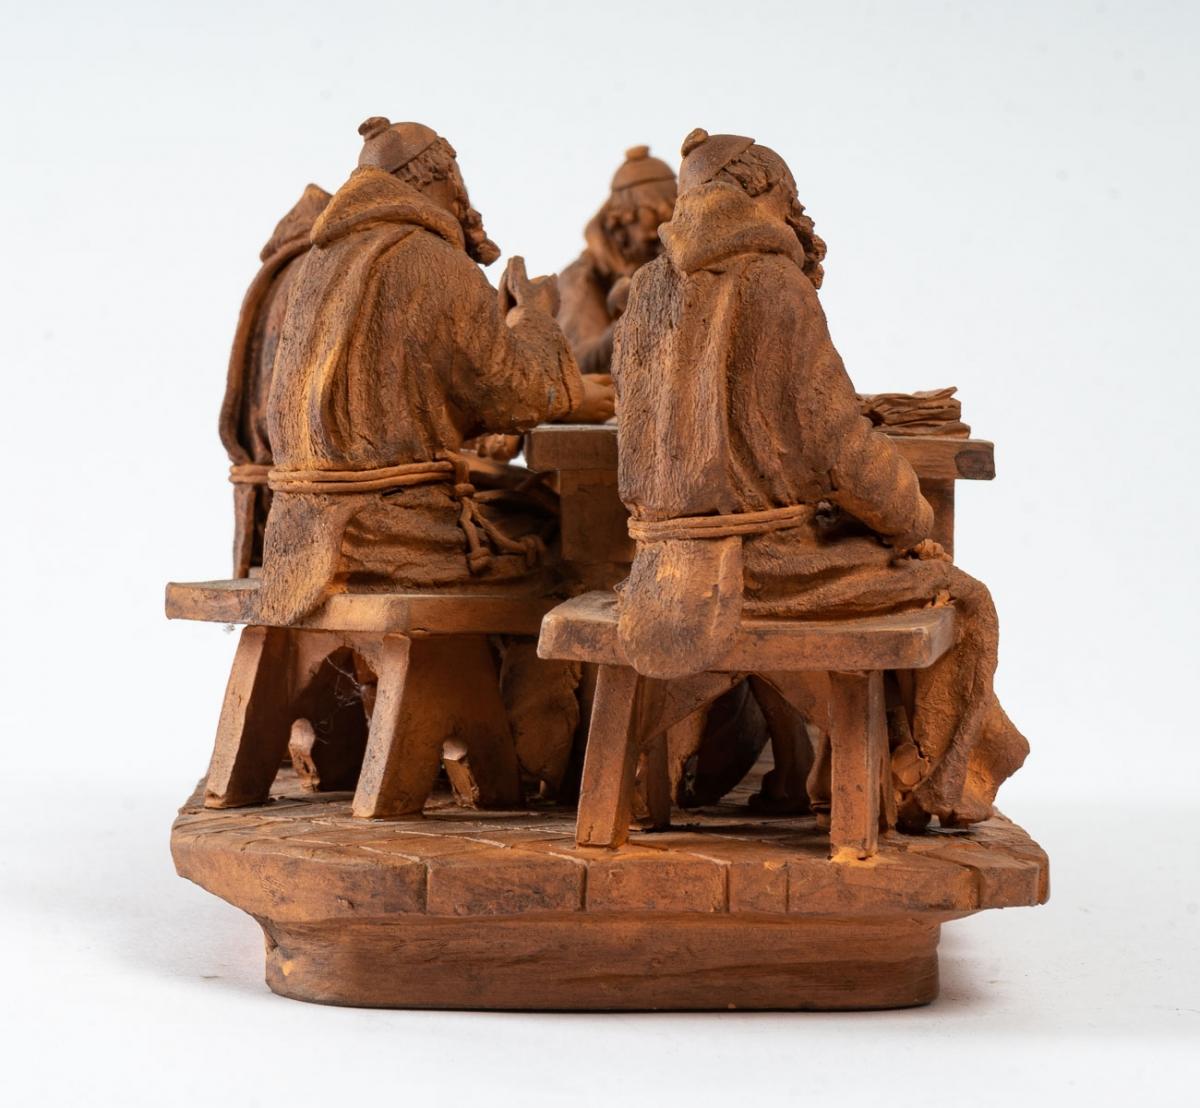 Terracotta sculpture - grasso - Circa : 1950-1960

Magnificent group of sculptures in fine terracotta, representing 5 Franciscan friars in a reading room. They are debating together. 

This work was made by the ceramist grasso, in the province